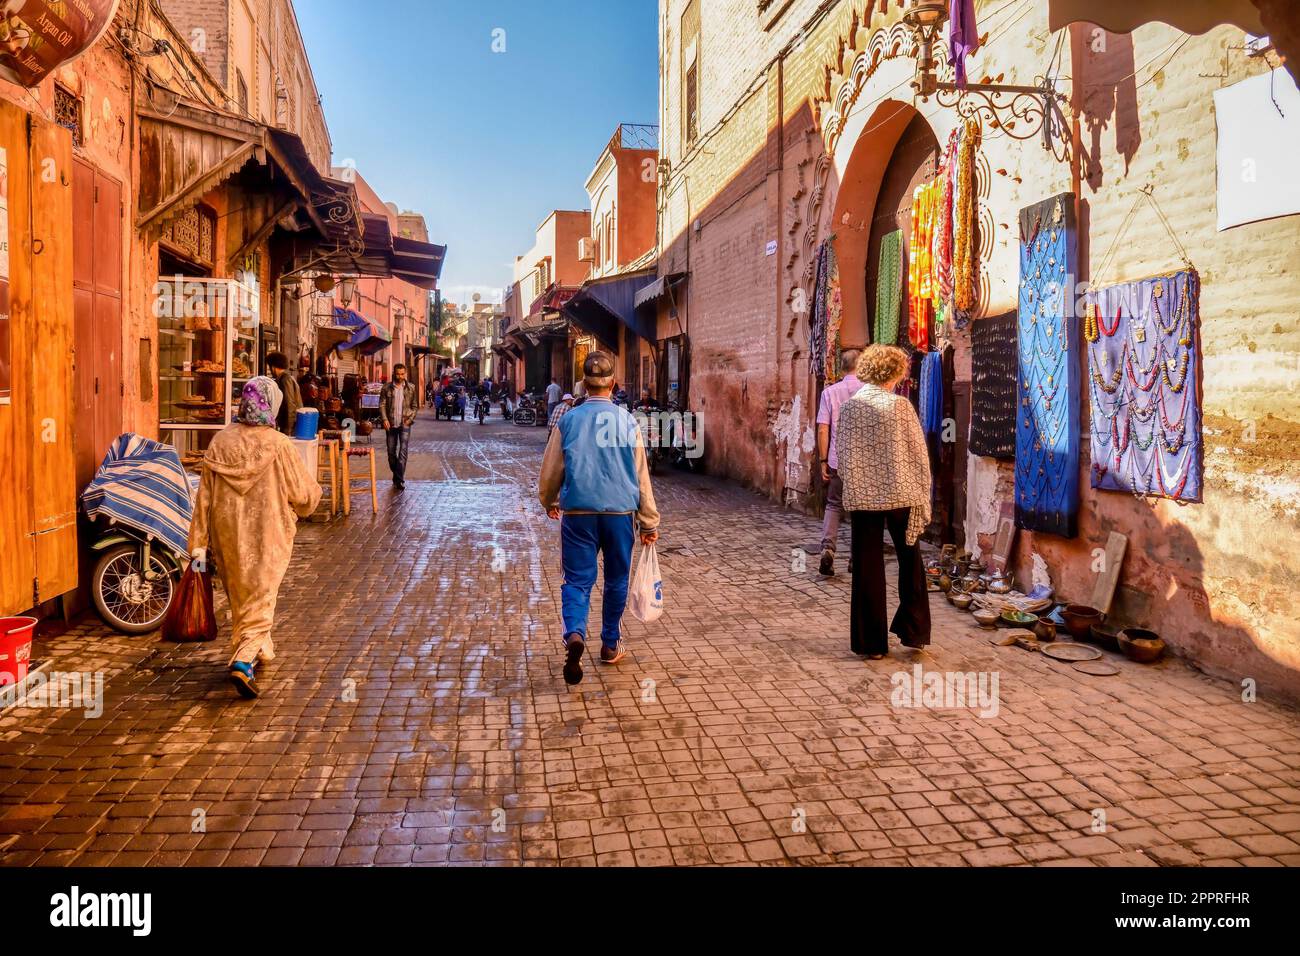 Marrakech, Morocco - October 19, 2015. Tourists and locals walking along a street in the Old City souk in early morning as shops open up for the day. Stock Photo